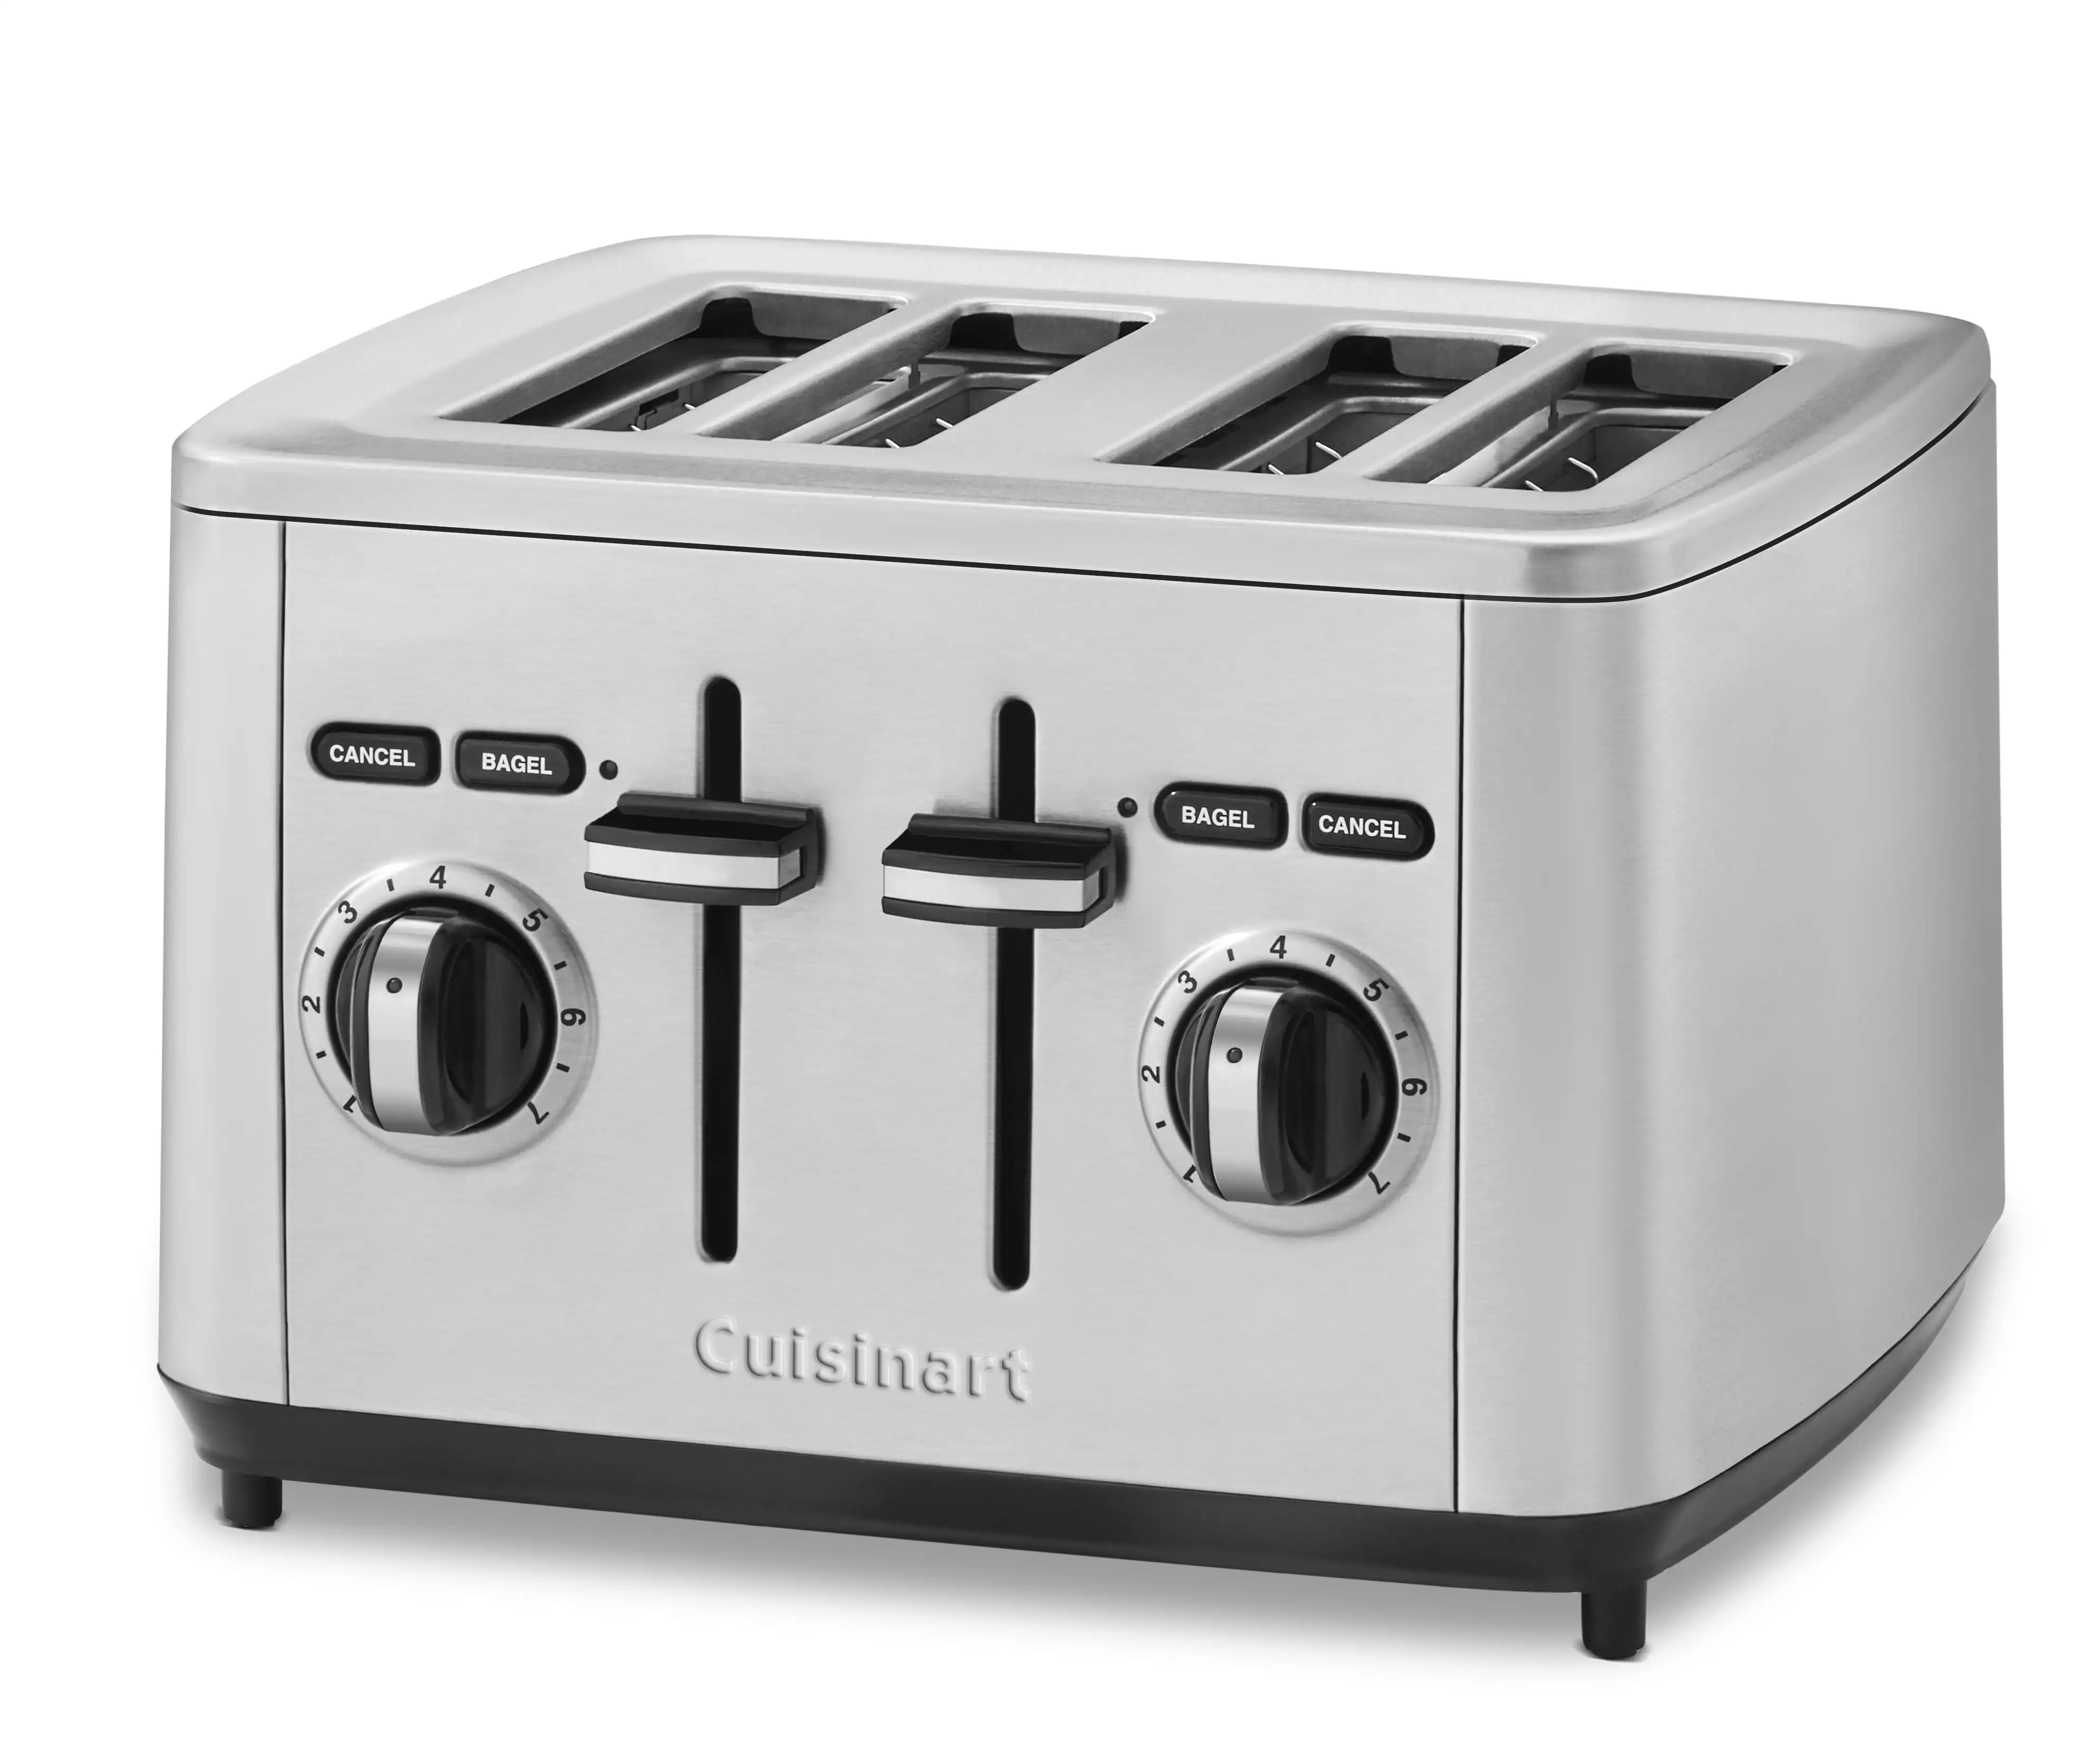 

Stainless Steel 4-Slice Toaster, CPT-14WM